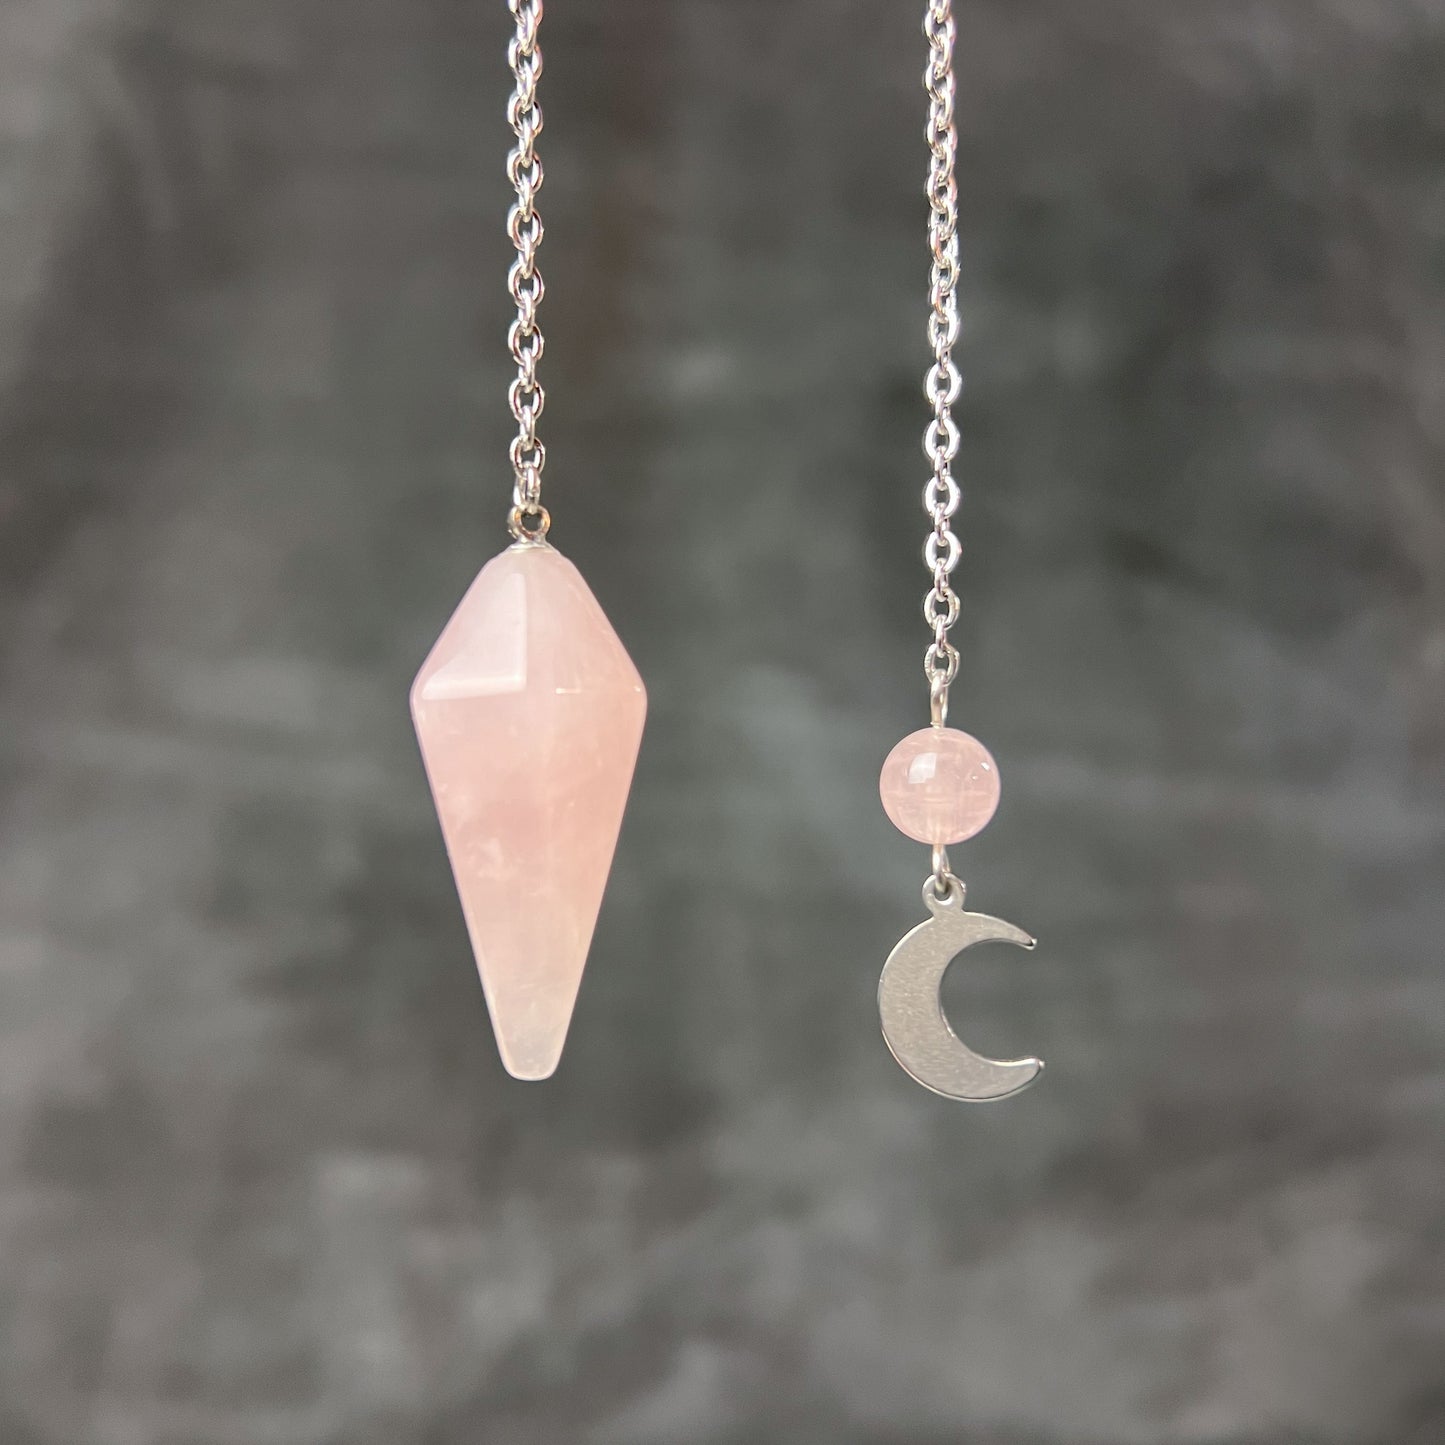 Stainless steel Rose quartz pendulum with a crescent Moon divination tool